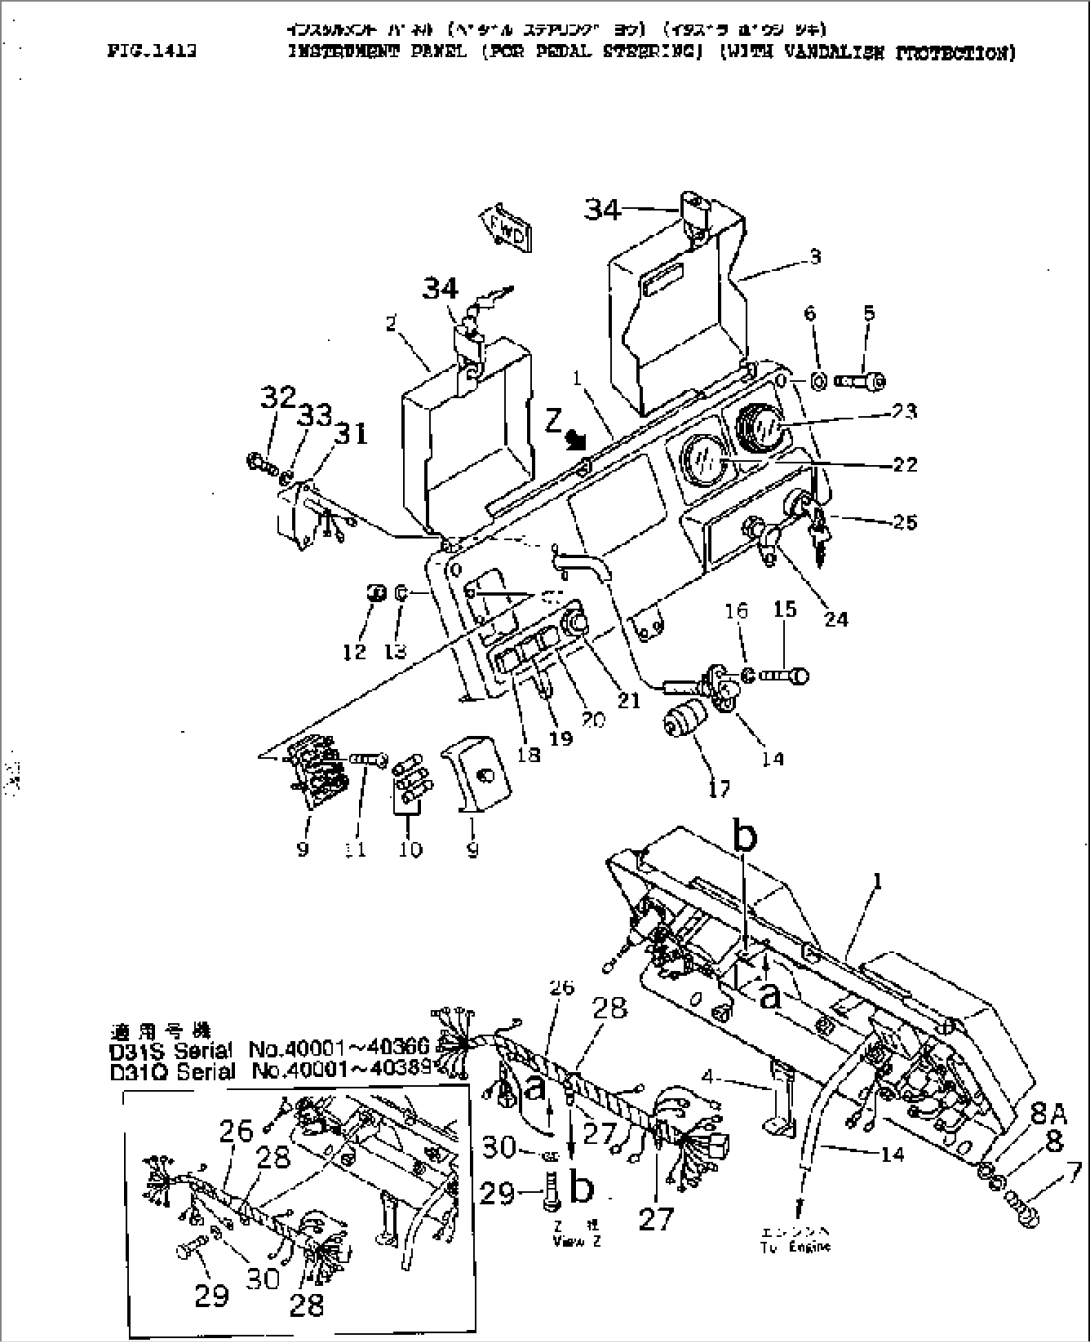 INSTRUMENT PANEL (FOR PEDAL STEERING) (WITH VANDALISM PROTECTION)